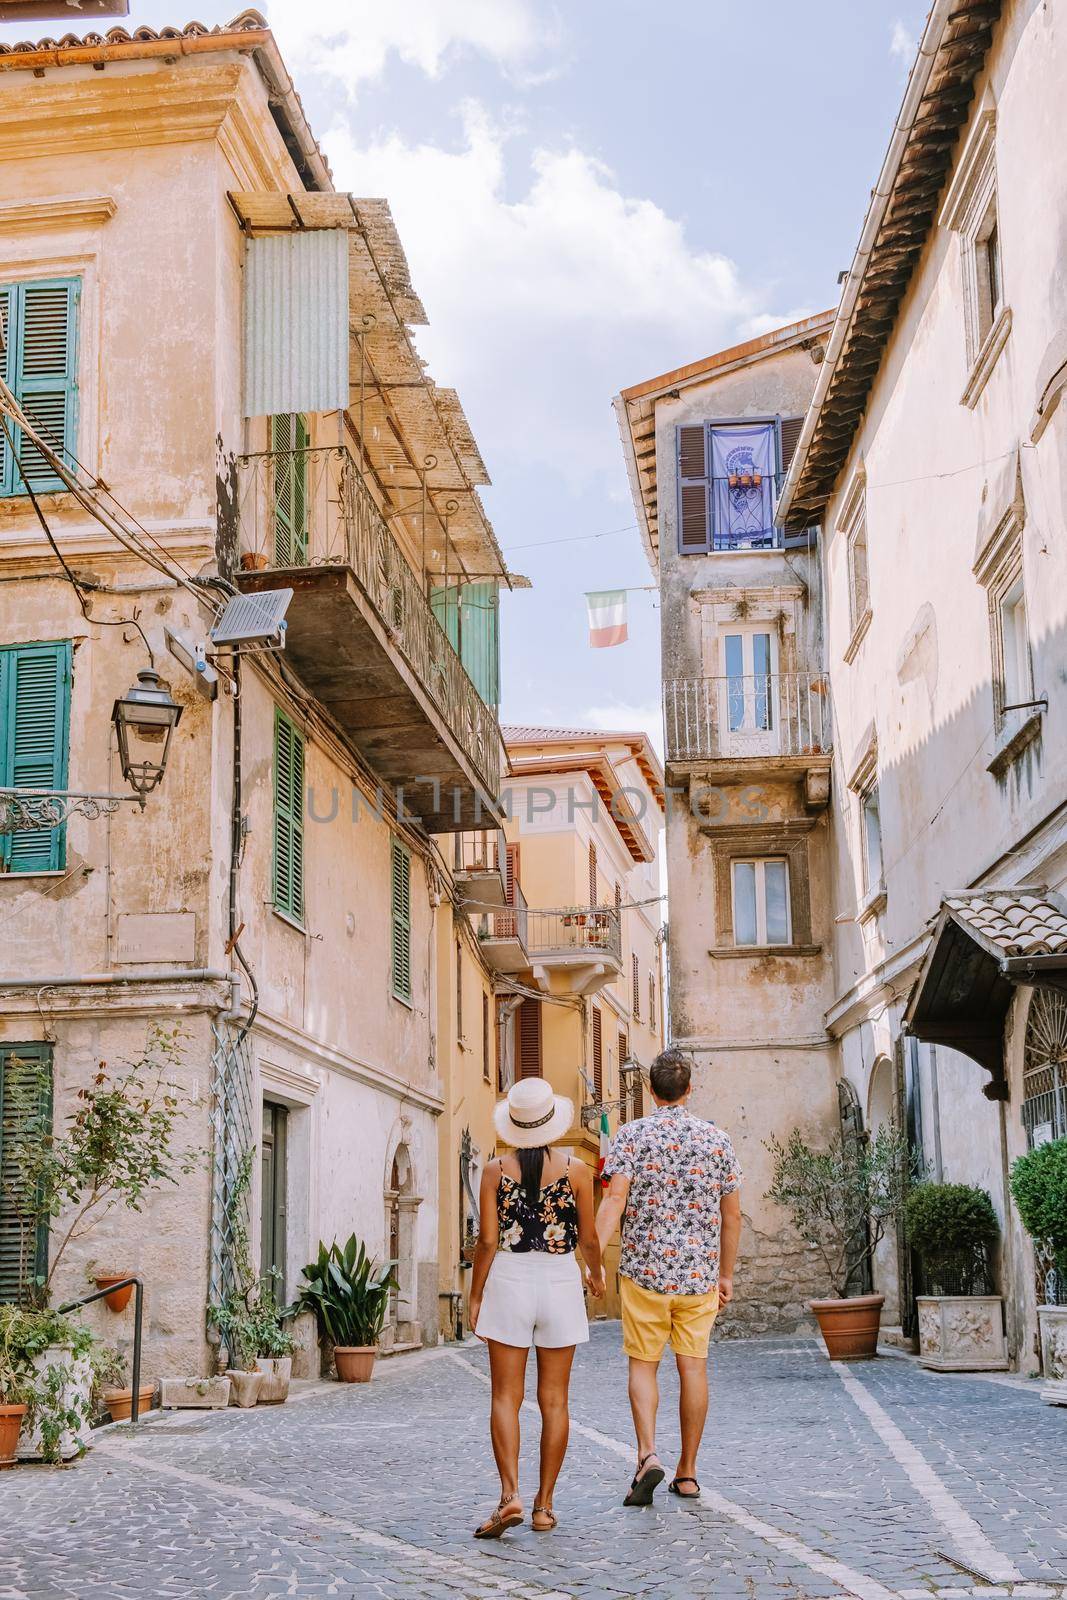 Overview of Fiuggi in Italy, Scenic sight in Fiuggi, province of Frosinone, Lazio, central Italy. Europe, couple walking on the colorful streets of Fiuggi